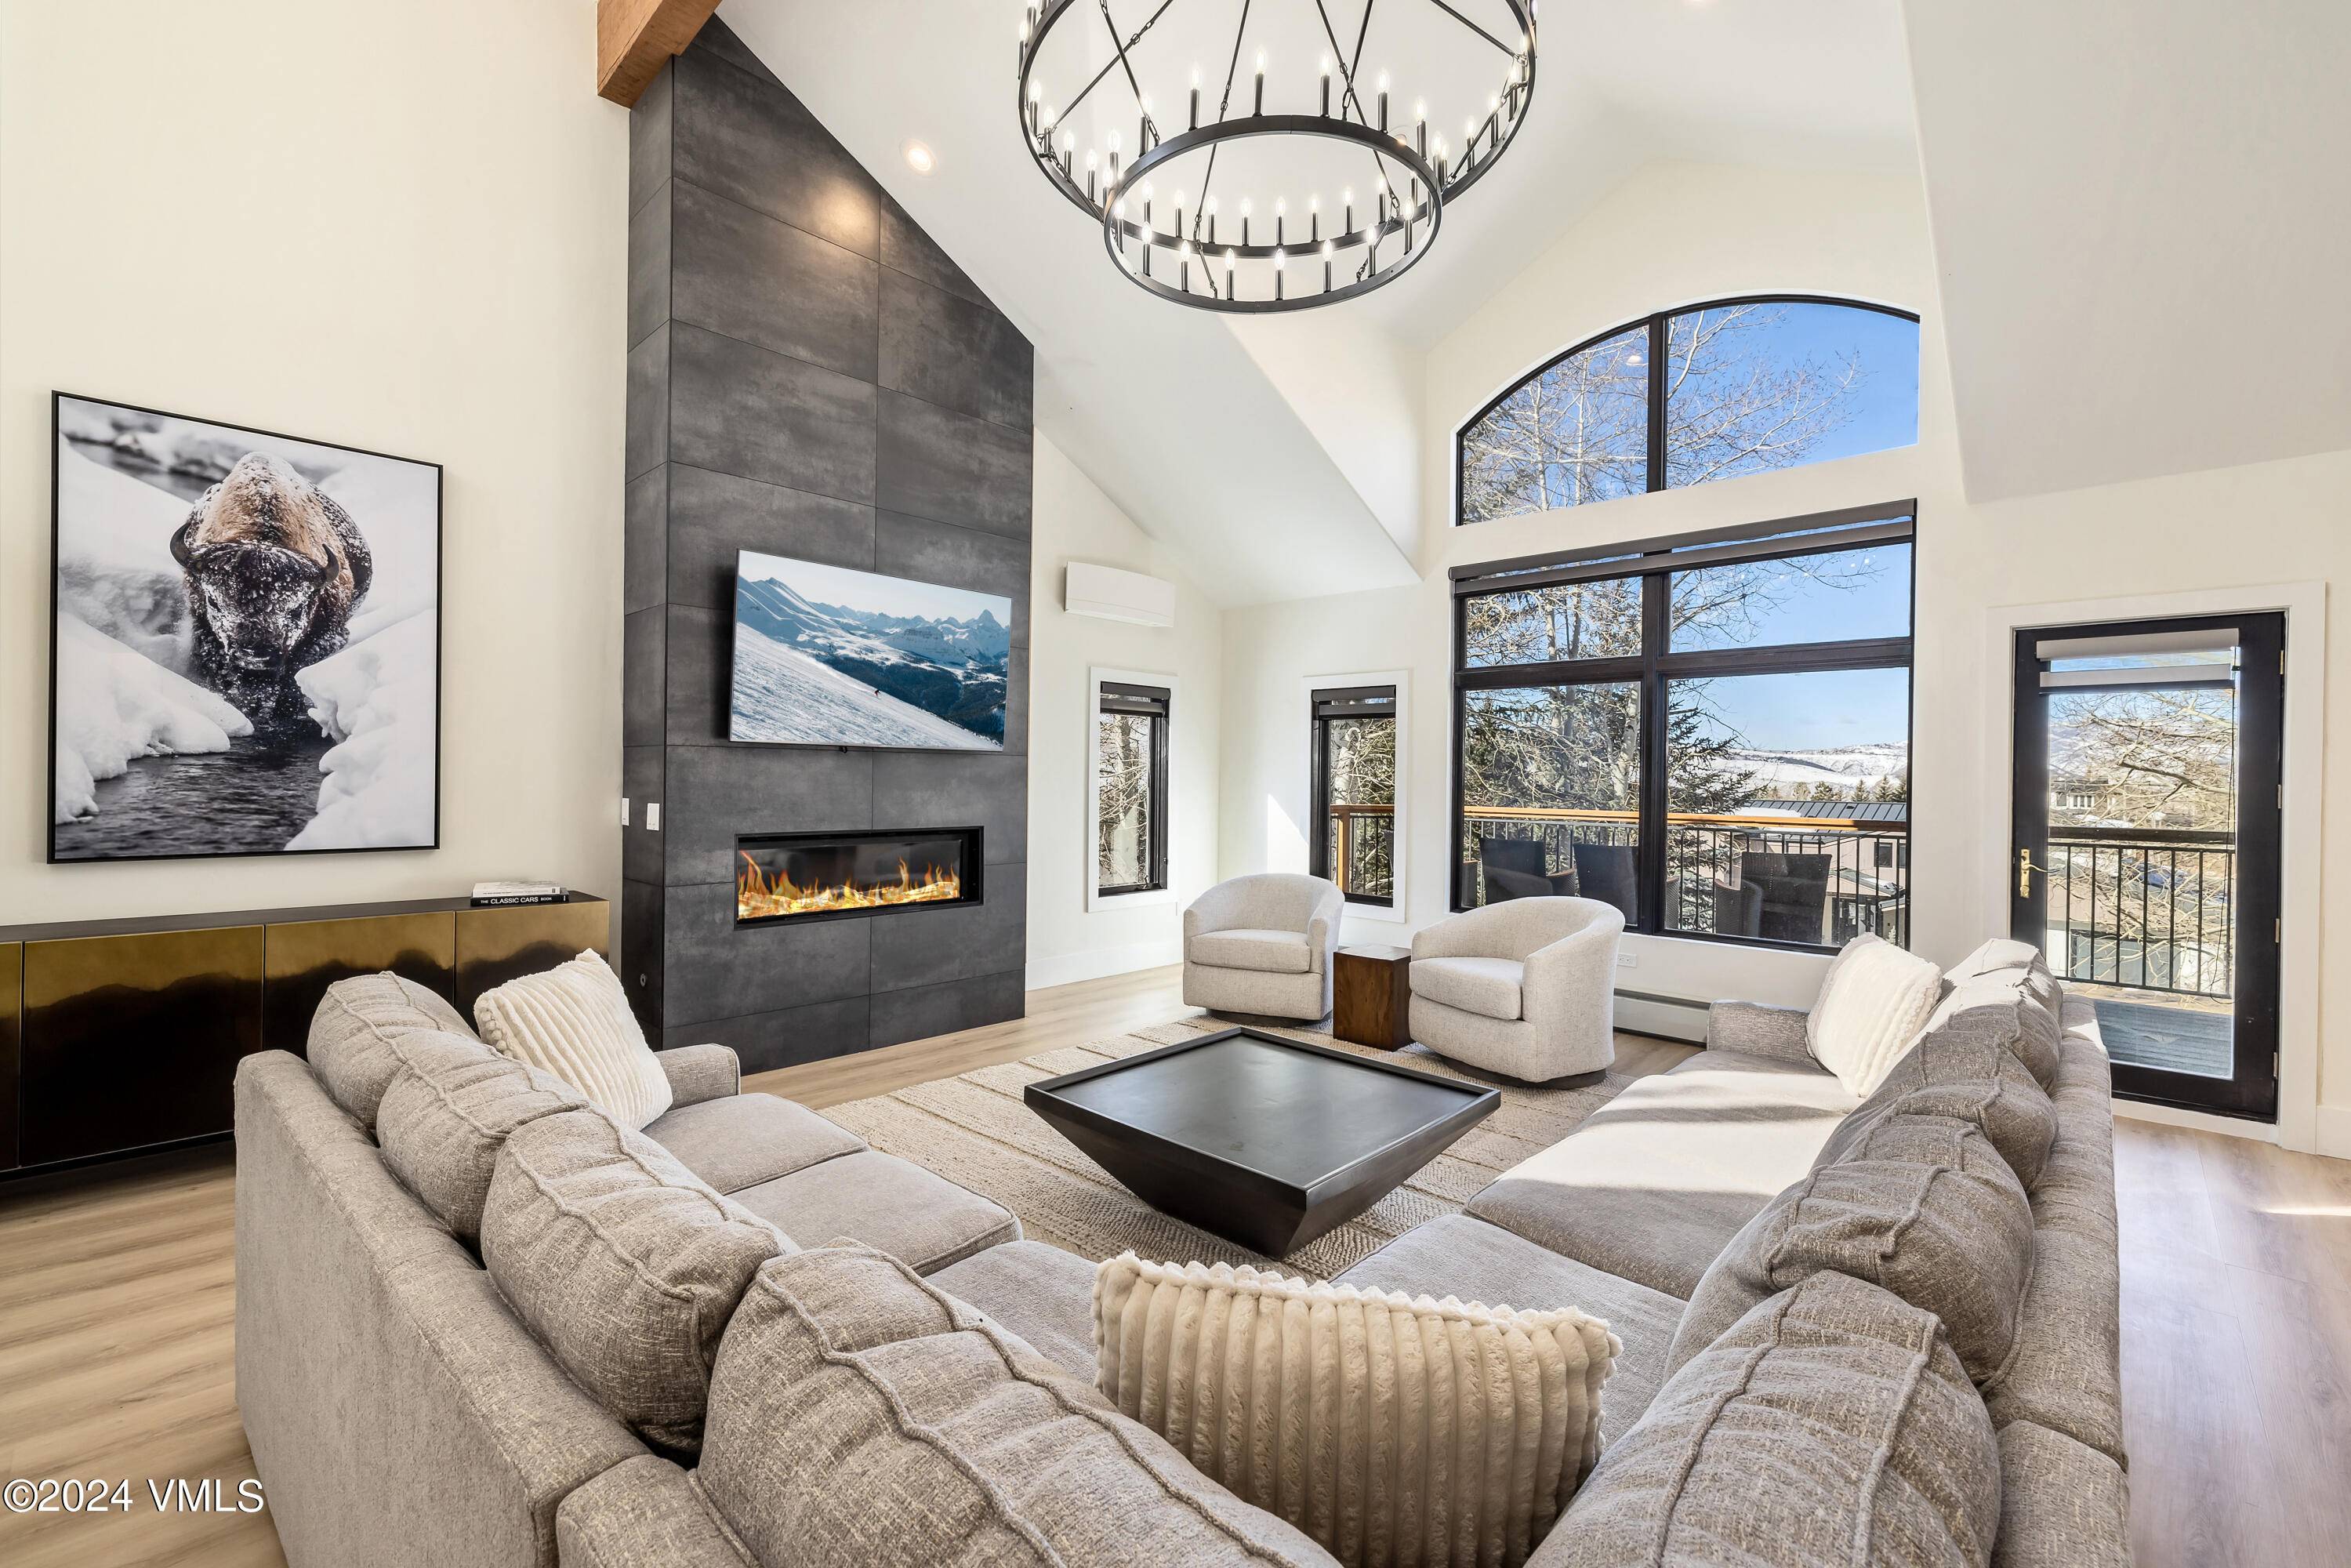 Elegantly simple and remodeled Singletree duplex on a naturally beautiful quiet road surrounded by expansive mountain ski slope views.